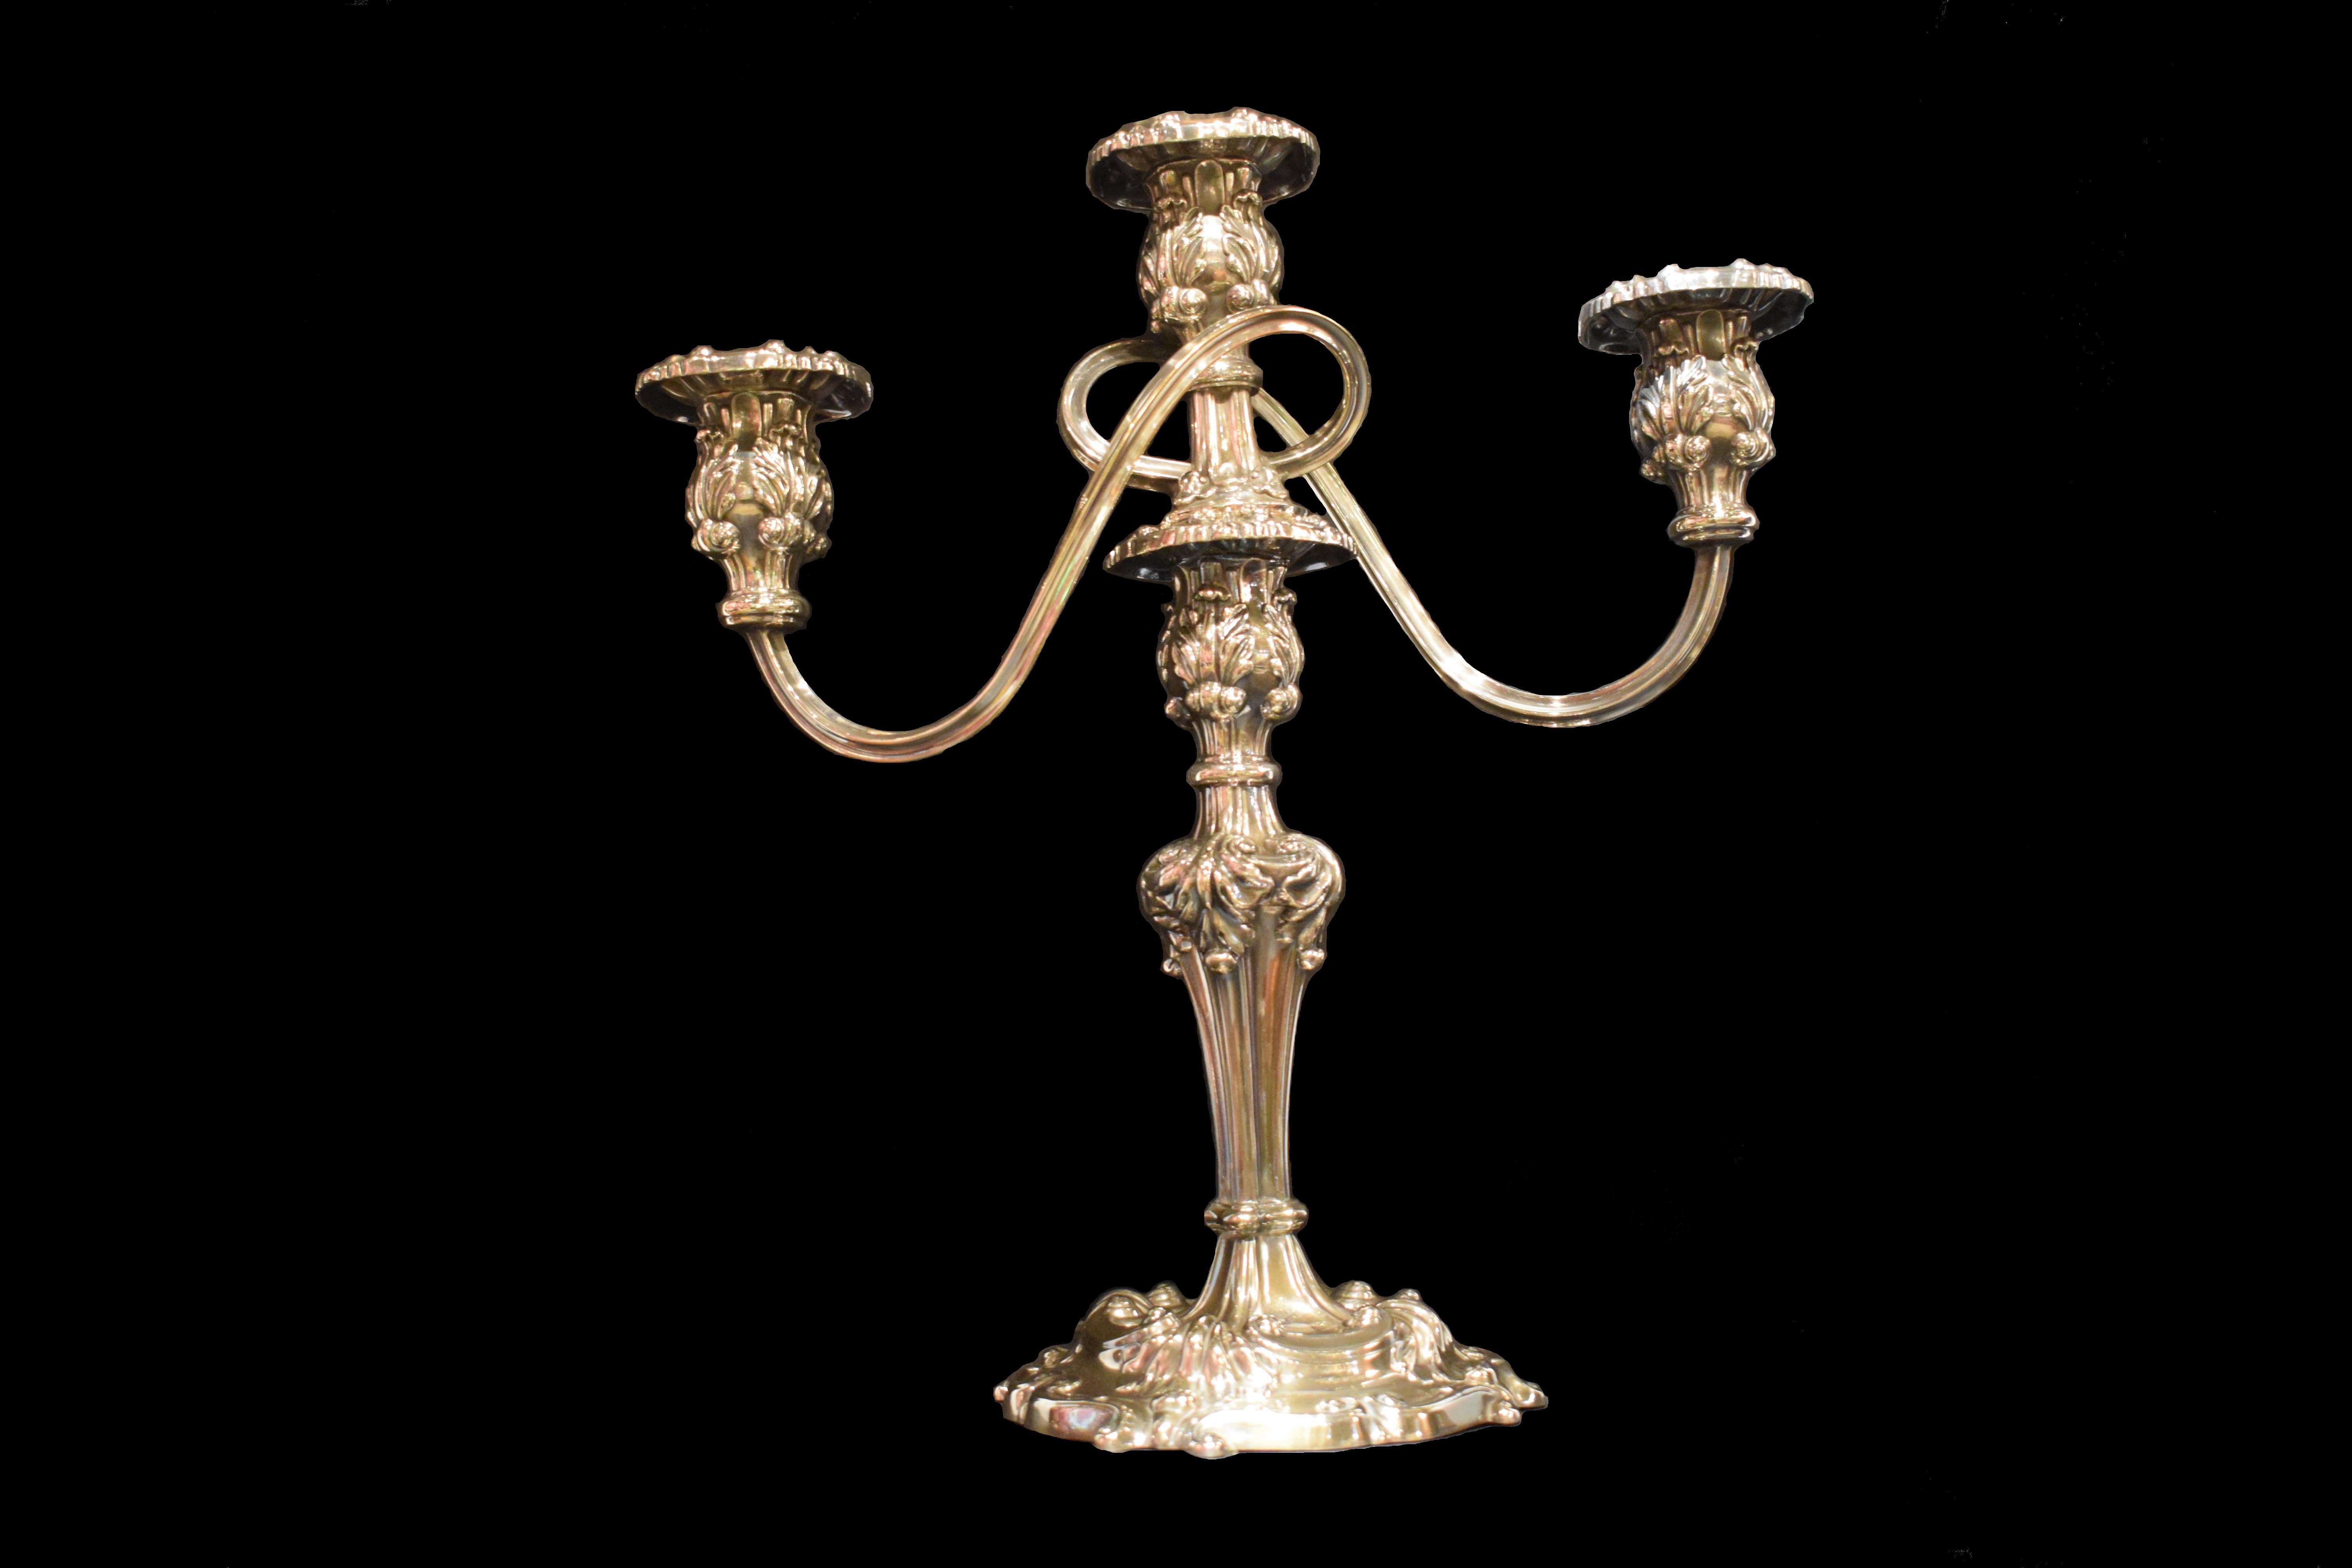 Pair of fine Reed & Barton Silver Plate Candelabra.
NI 1128.